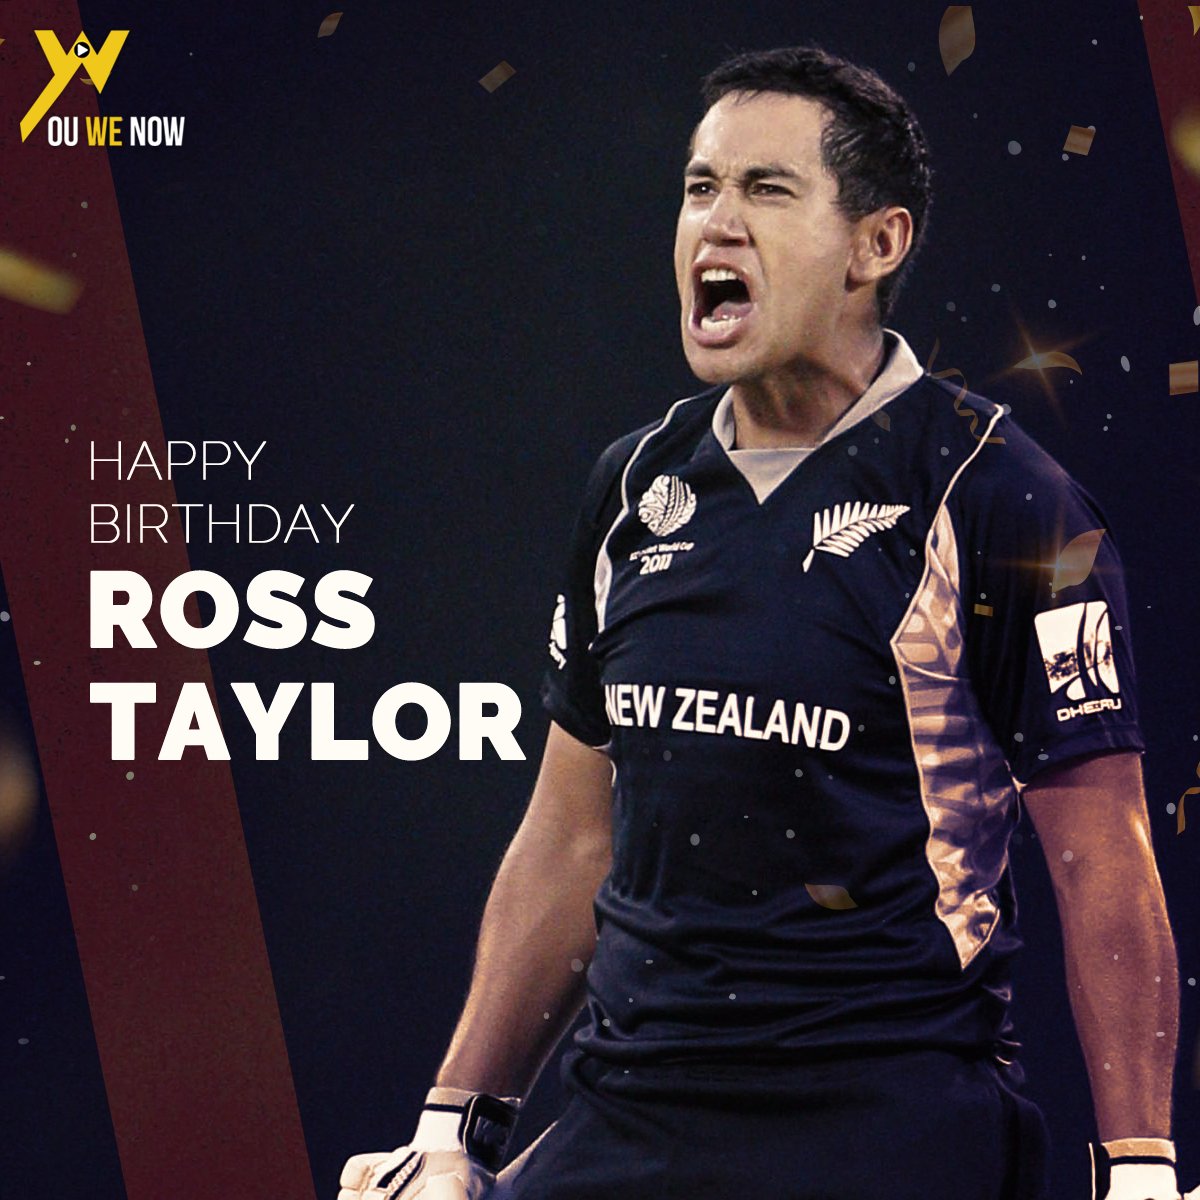 May this year bring the most wonderful things into your life, you truly deserve it. Happy Birthday Ross Taylor! 